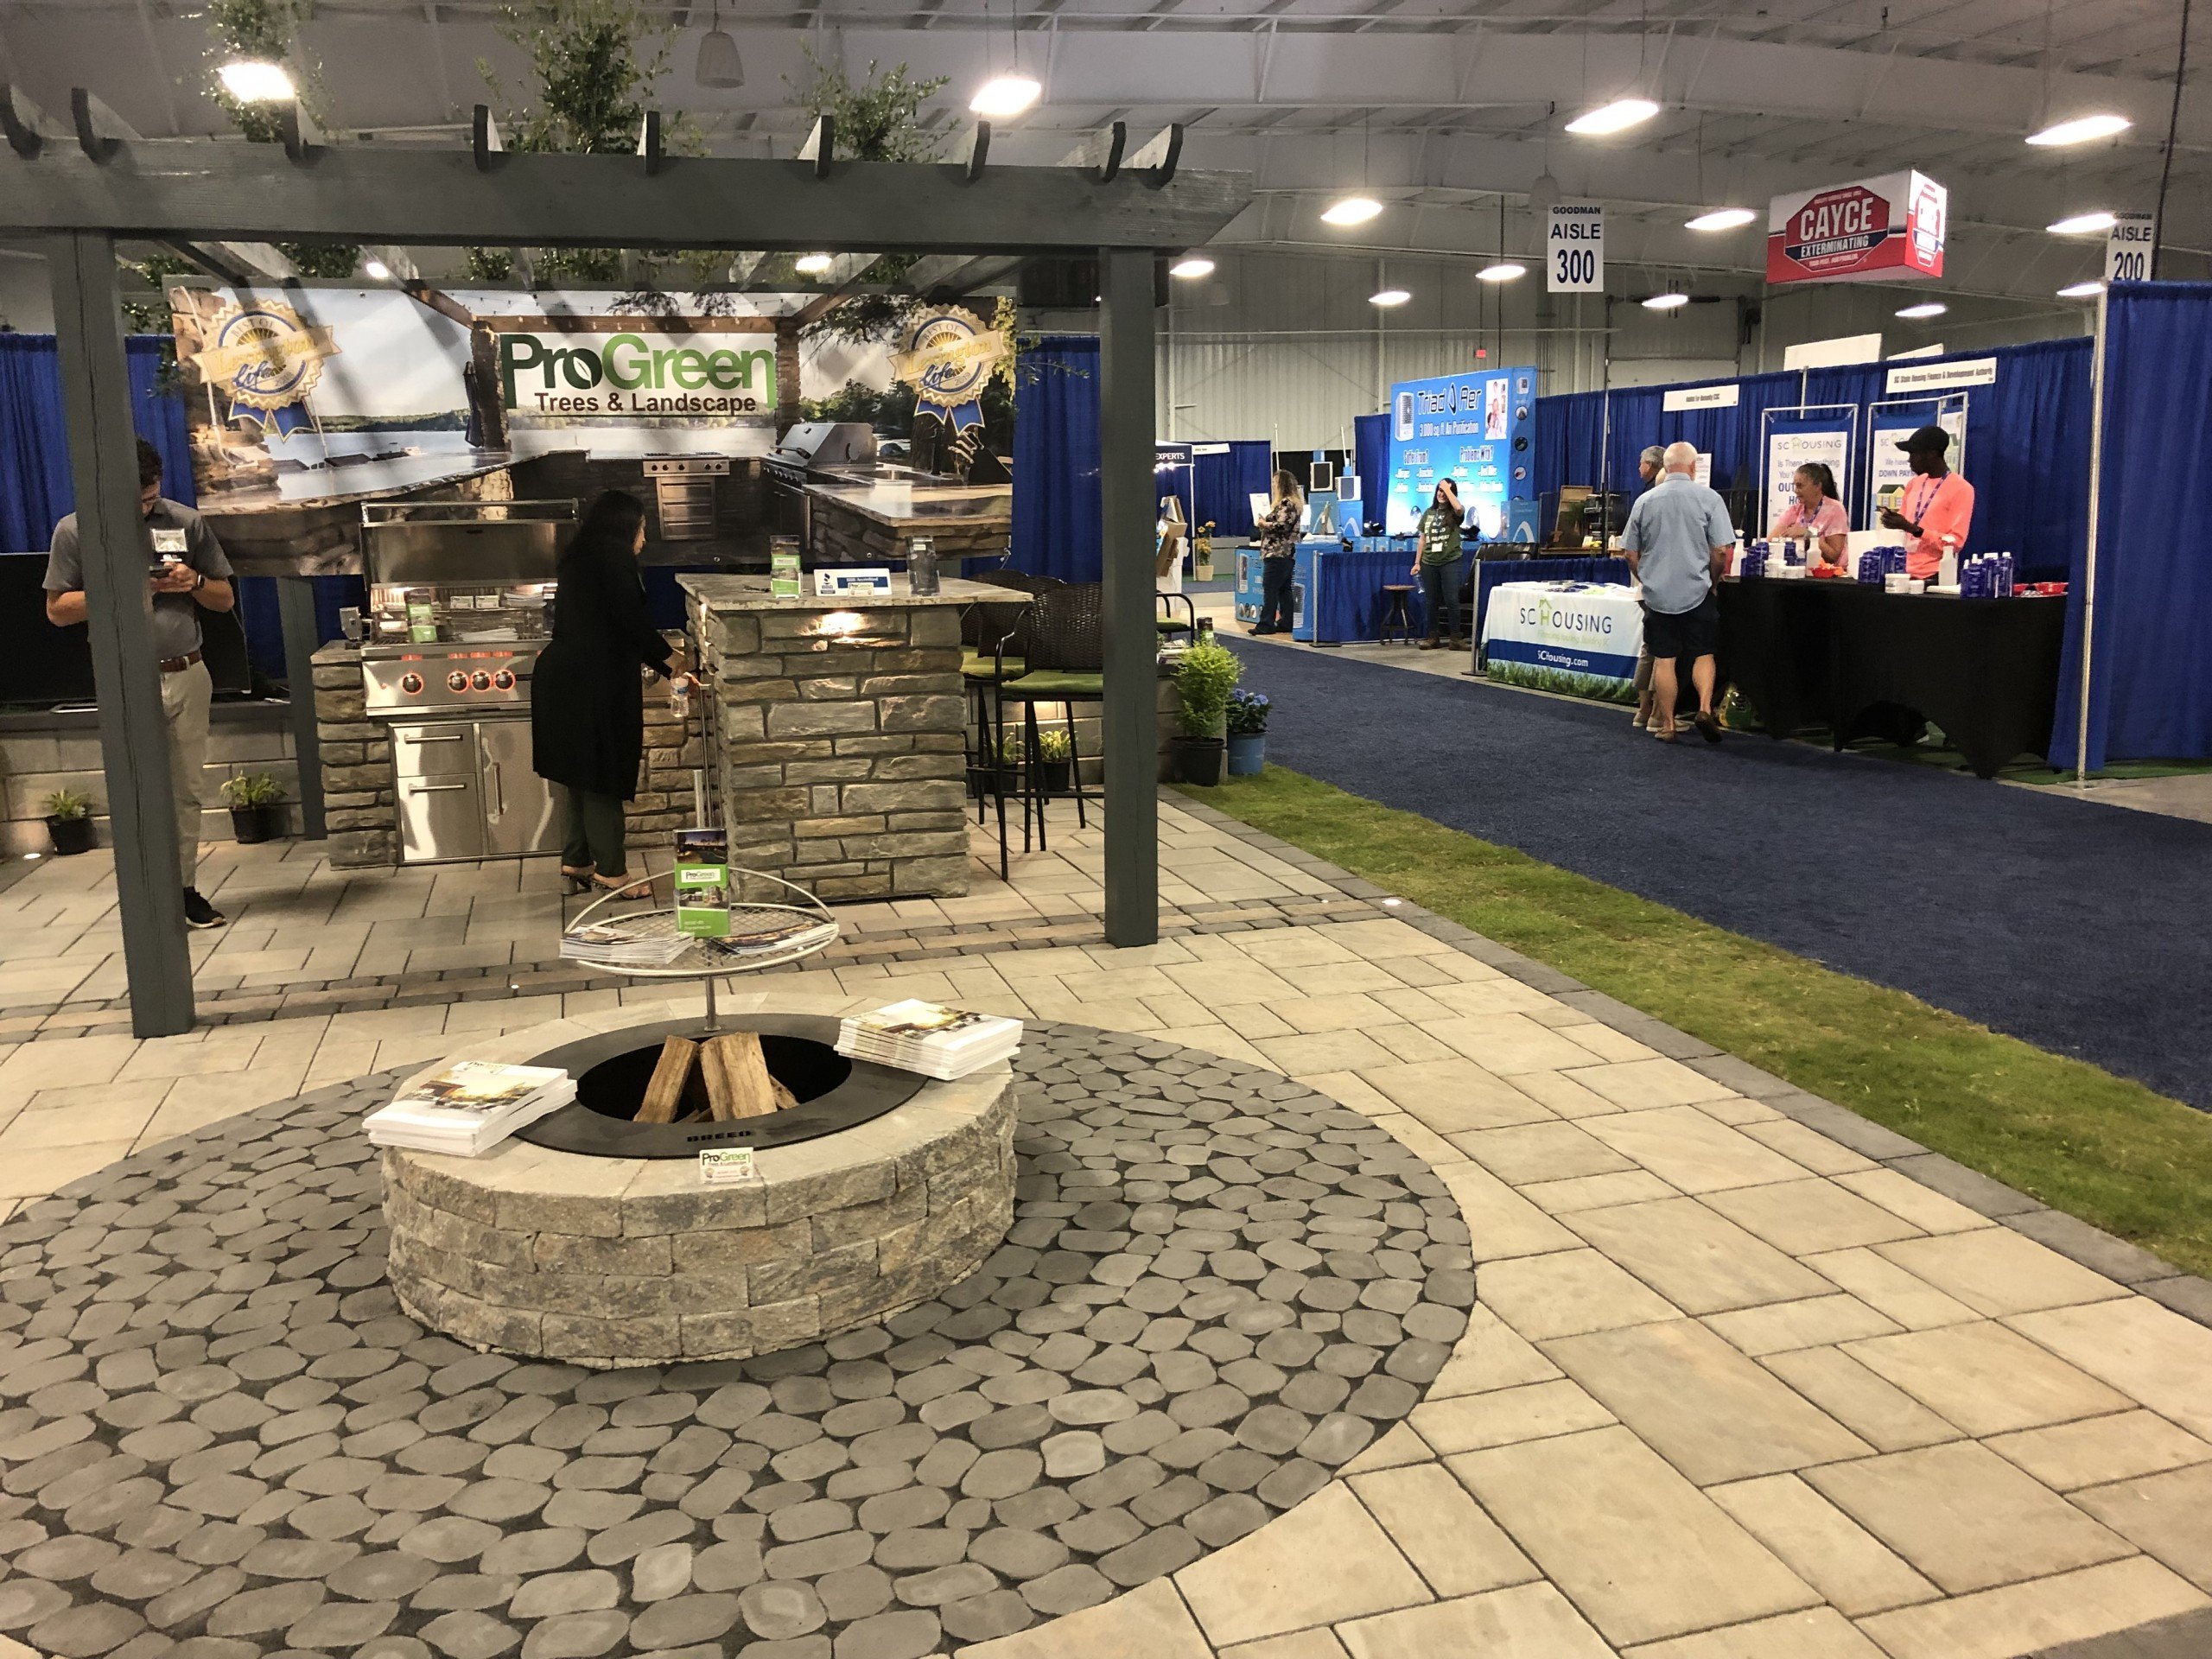 55th Annual Carolina Classic Home & Garden Show kicks off at the State